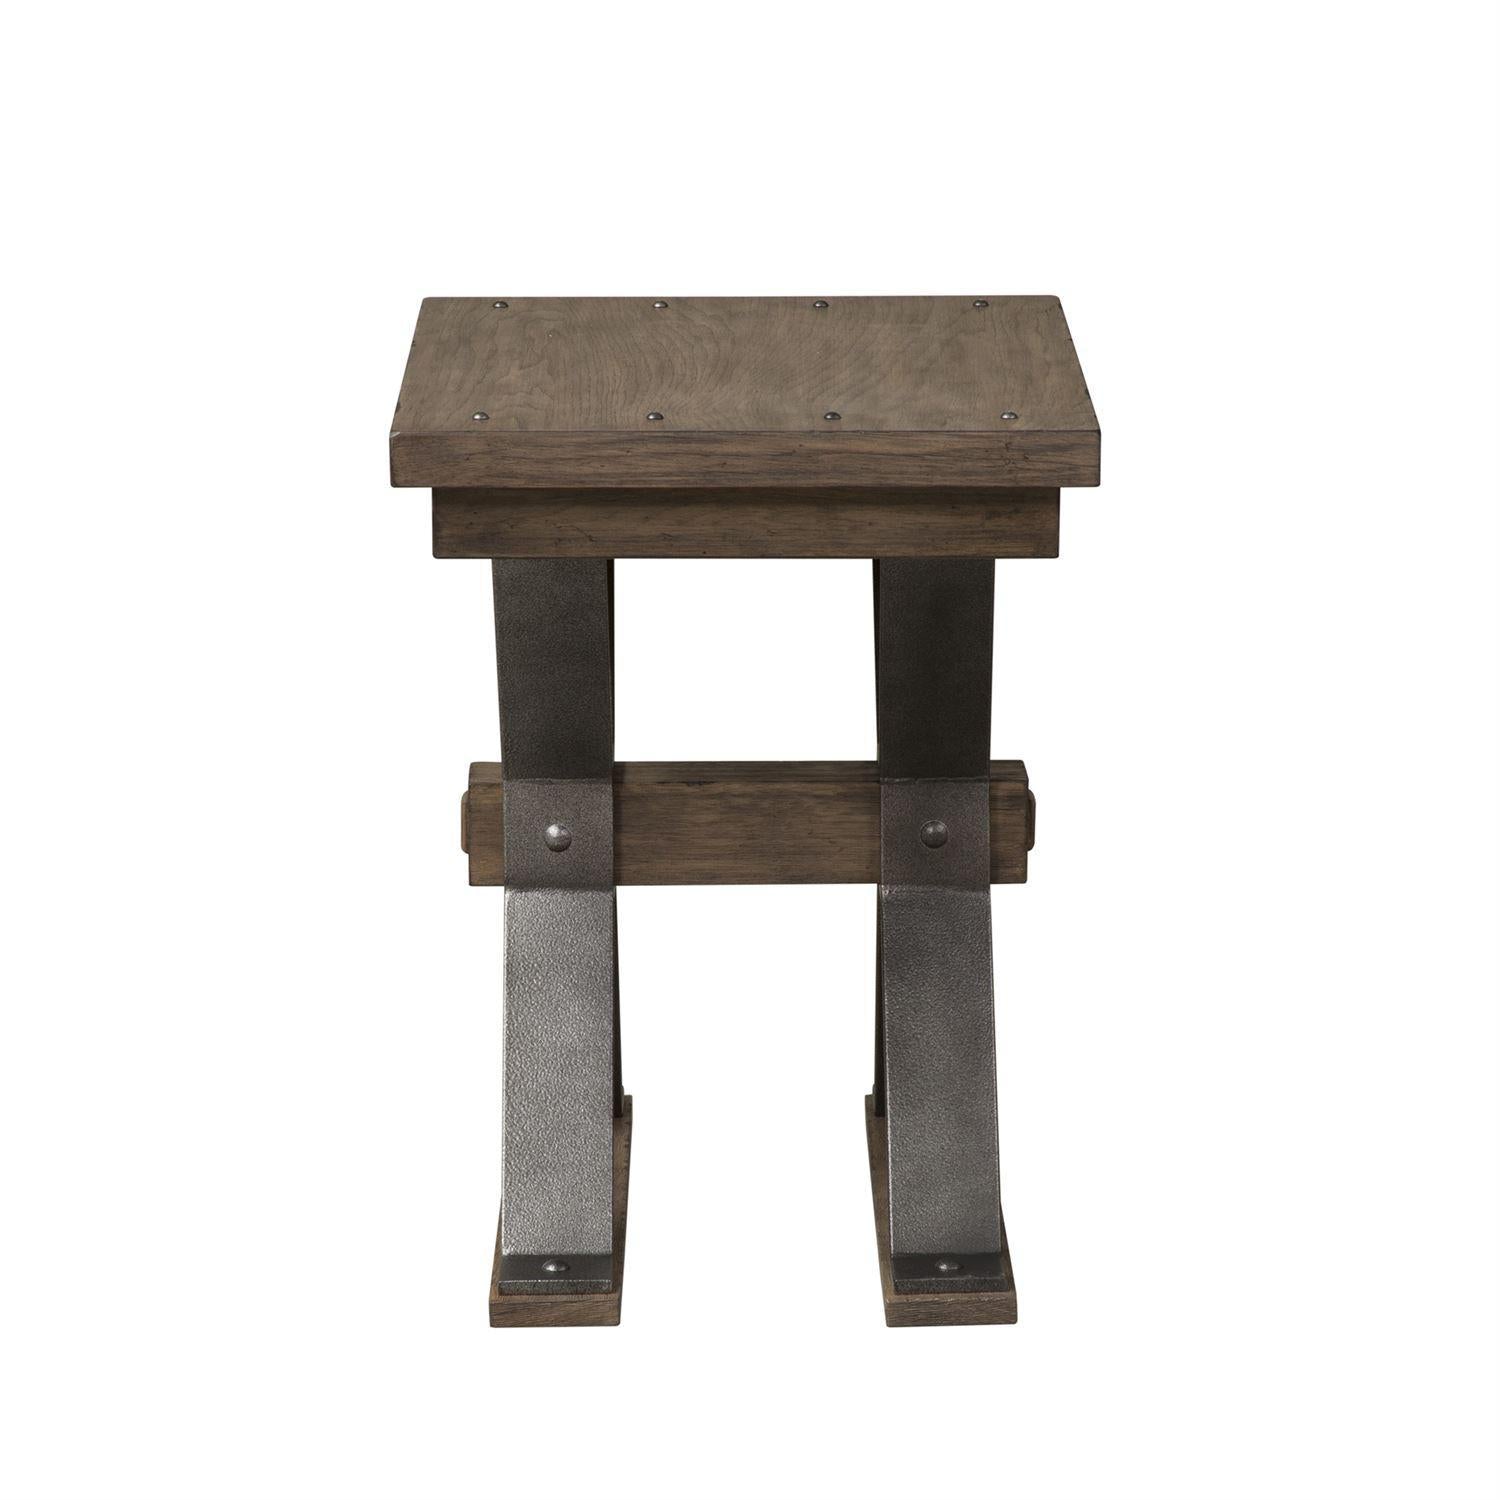 Liberty Sonoma Road Chair Side Table in Weathered Beaten Bark